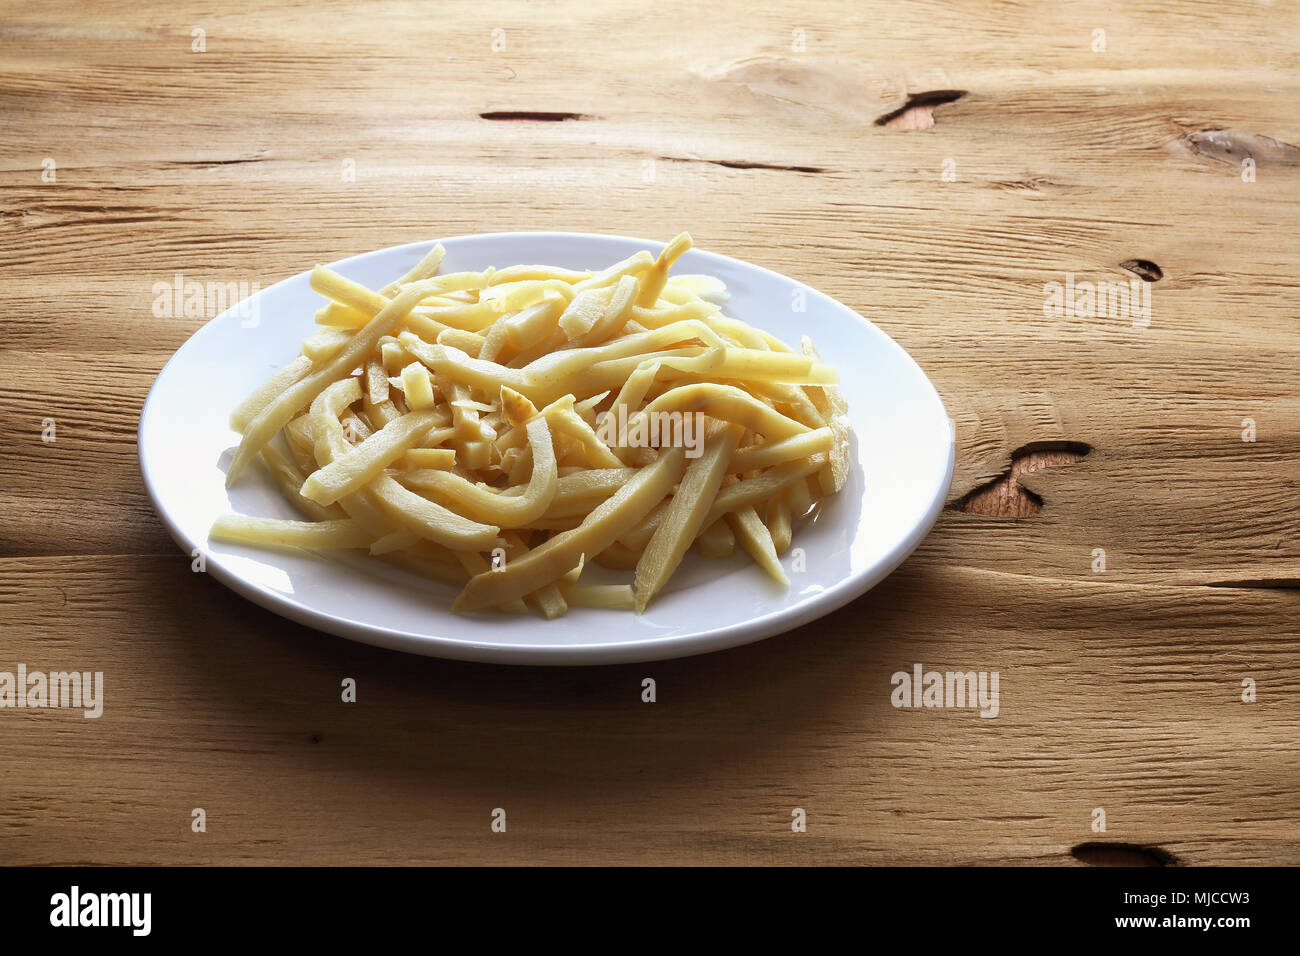 Bamboo Shoots on Wooden Background Stock Photo